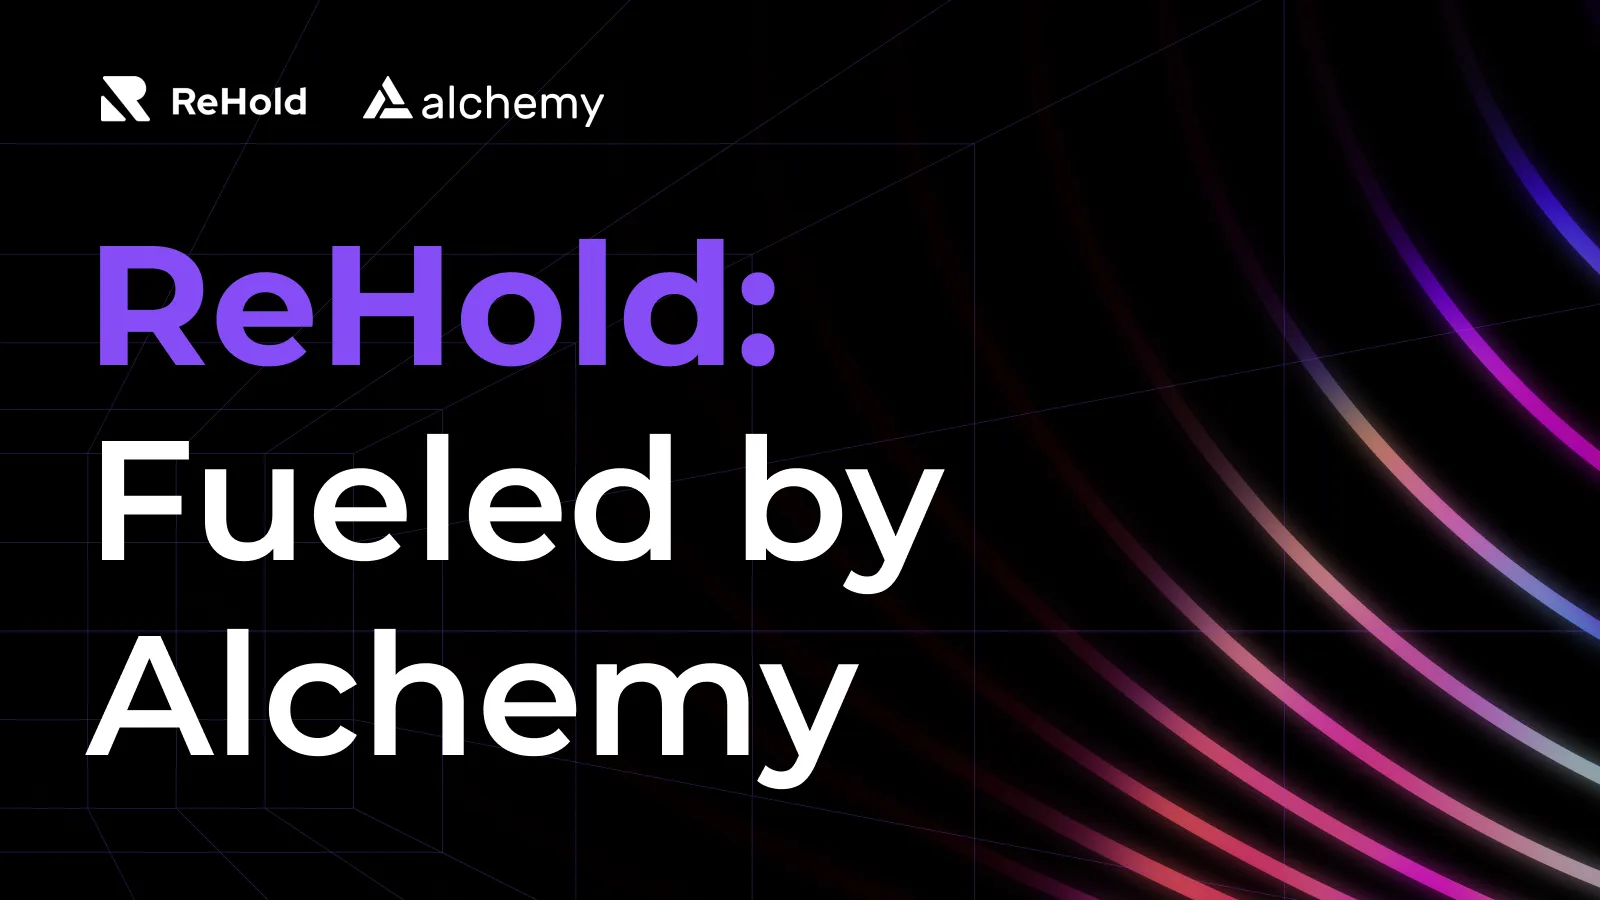 ReHold & Alchemy: From Grant to Amplify Partnership